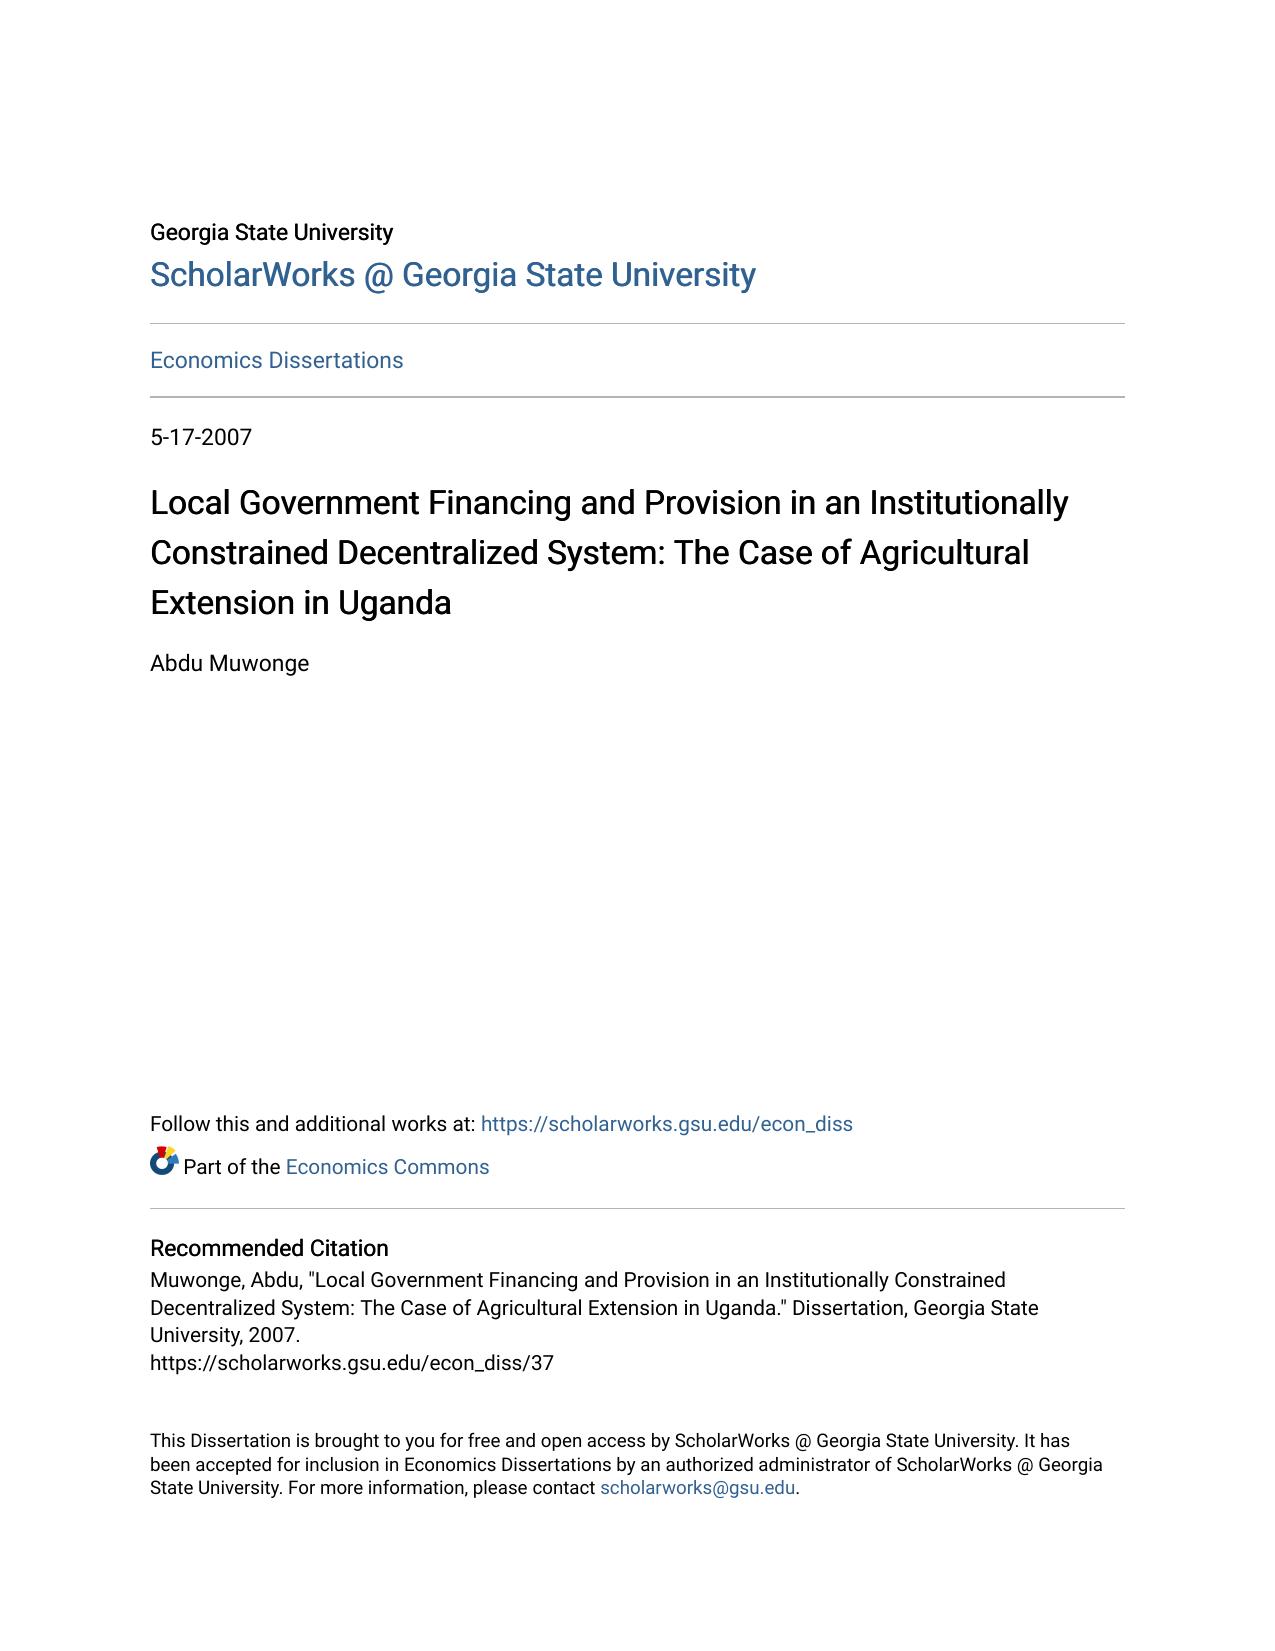 Local Government Financing and Provision in an Institutionally Constrained Decentralized System: The Case of Agricultural Extension in Uganda